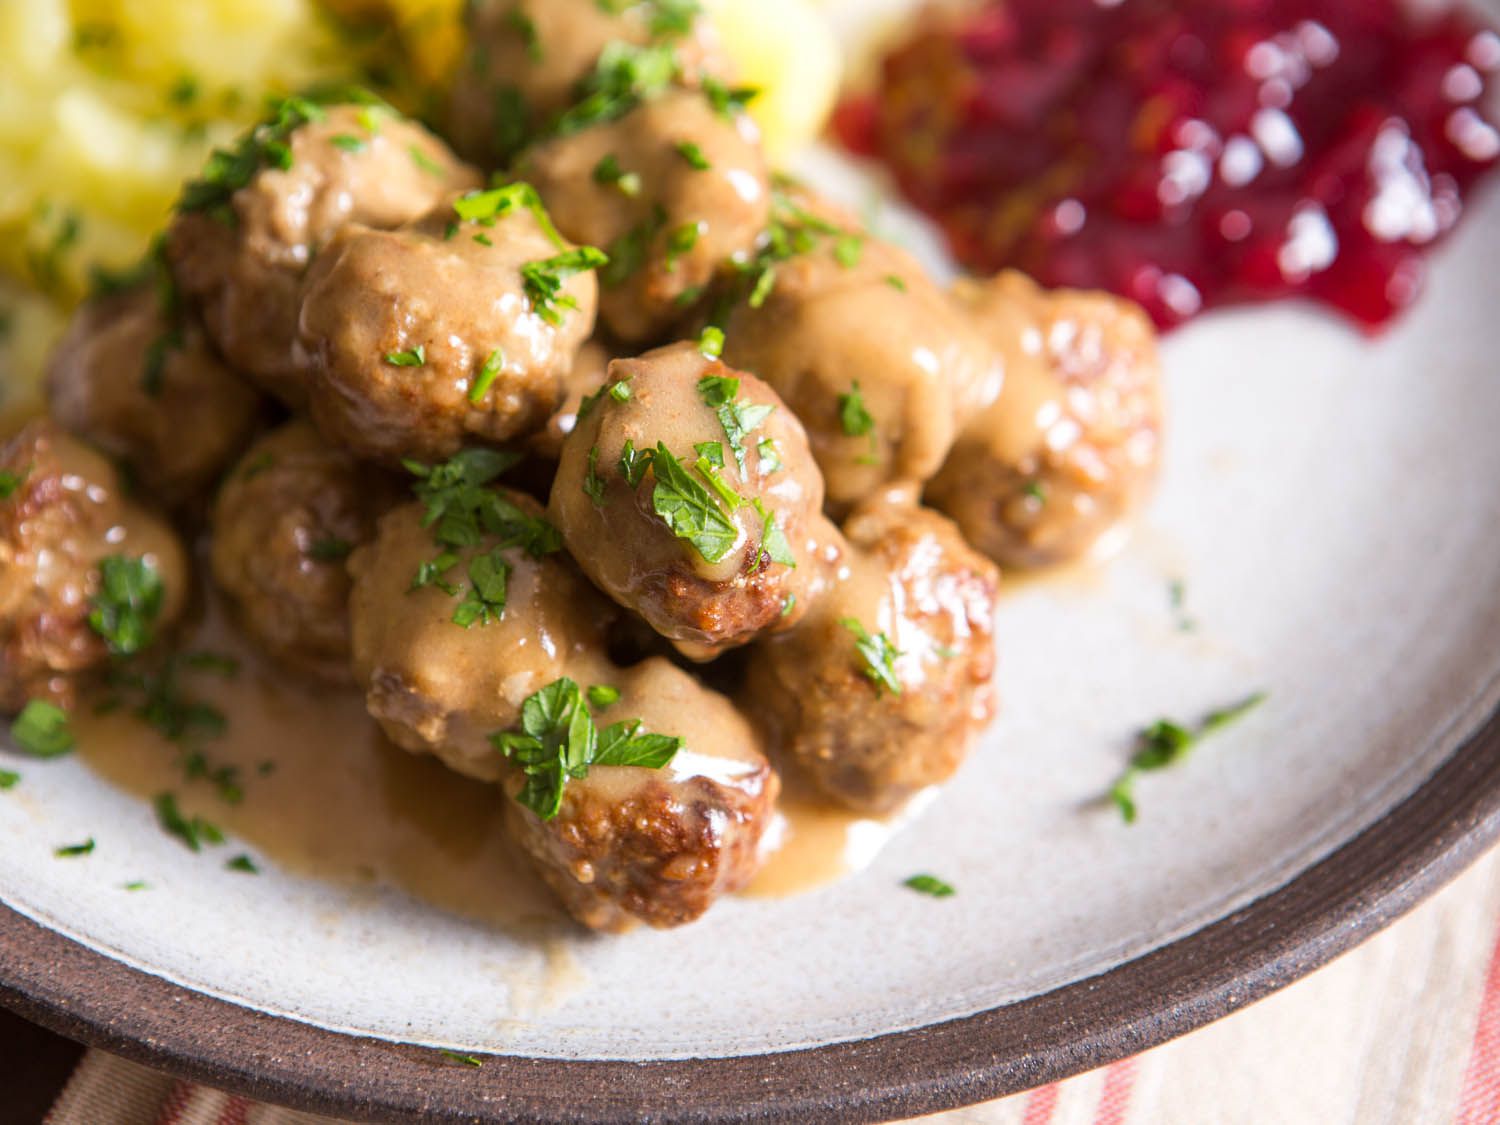 A plate of Swedish meatballs coated in a rich gravy served with lingonberry sauce and potatoes